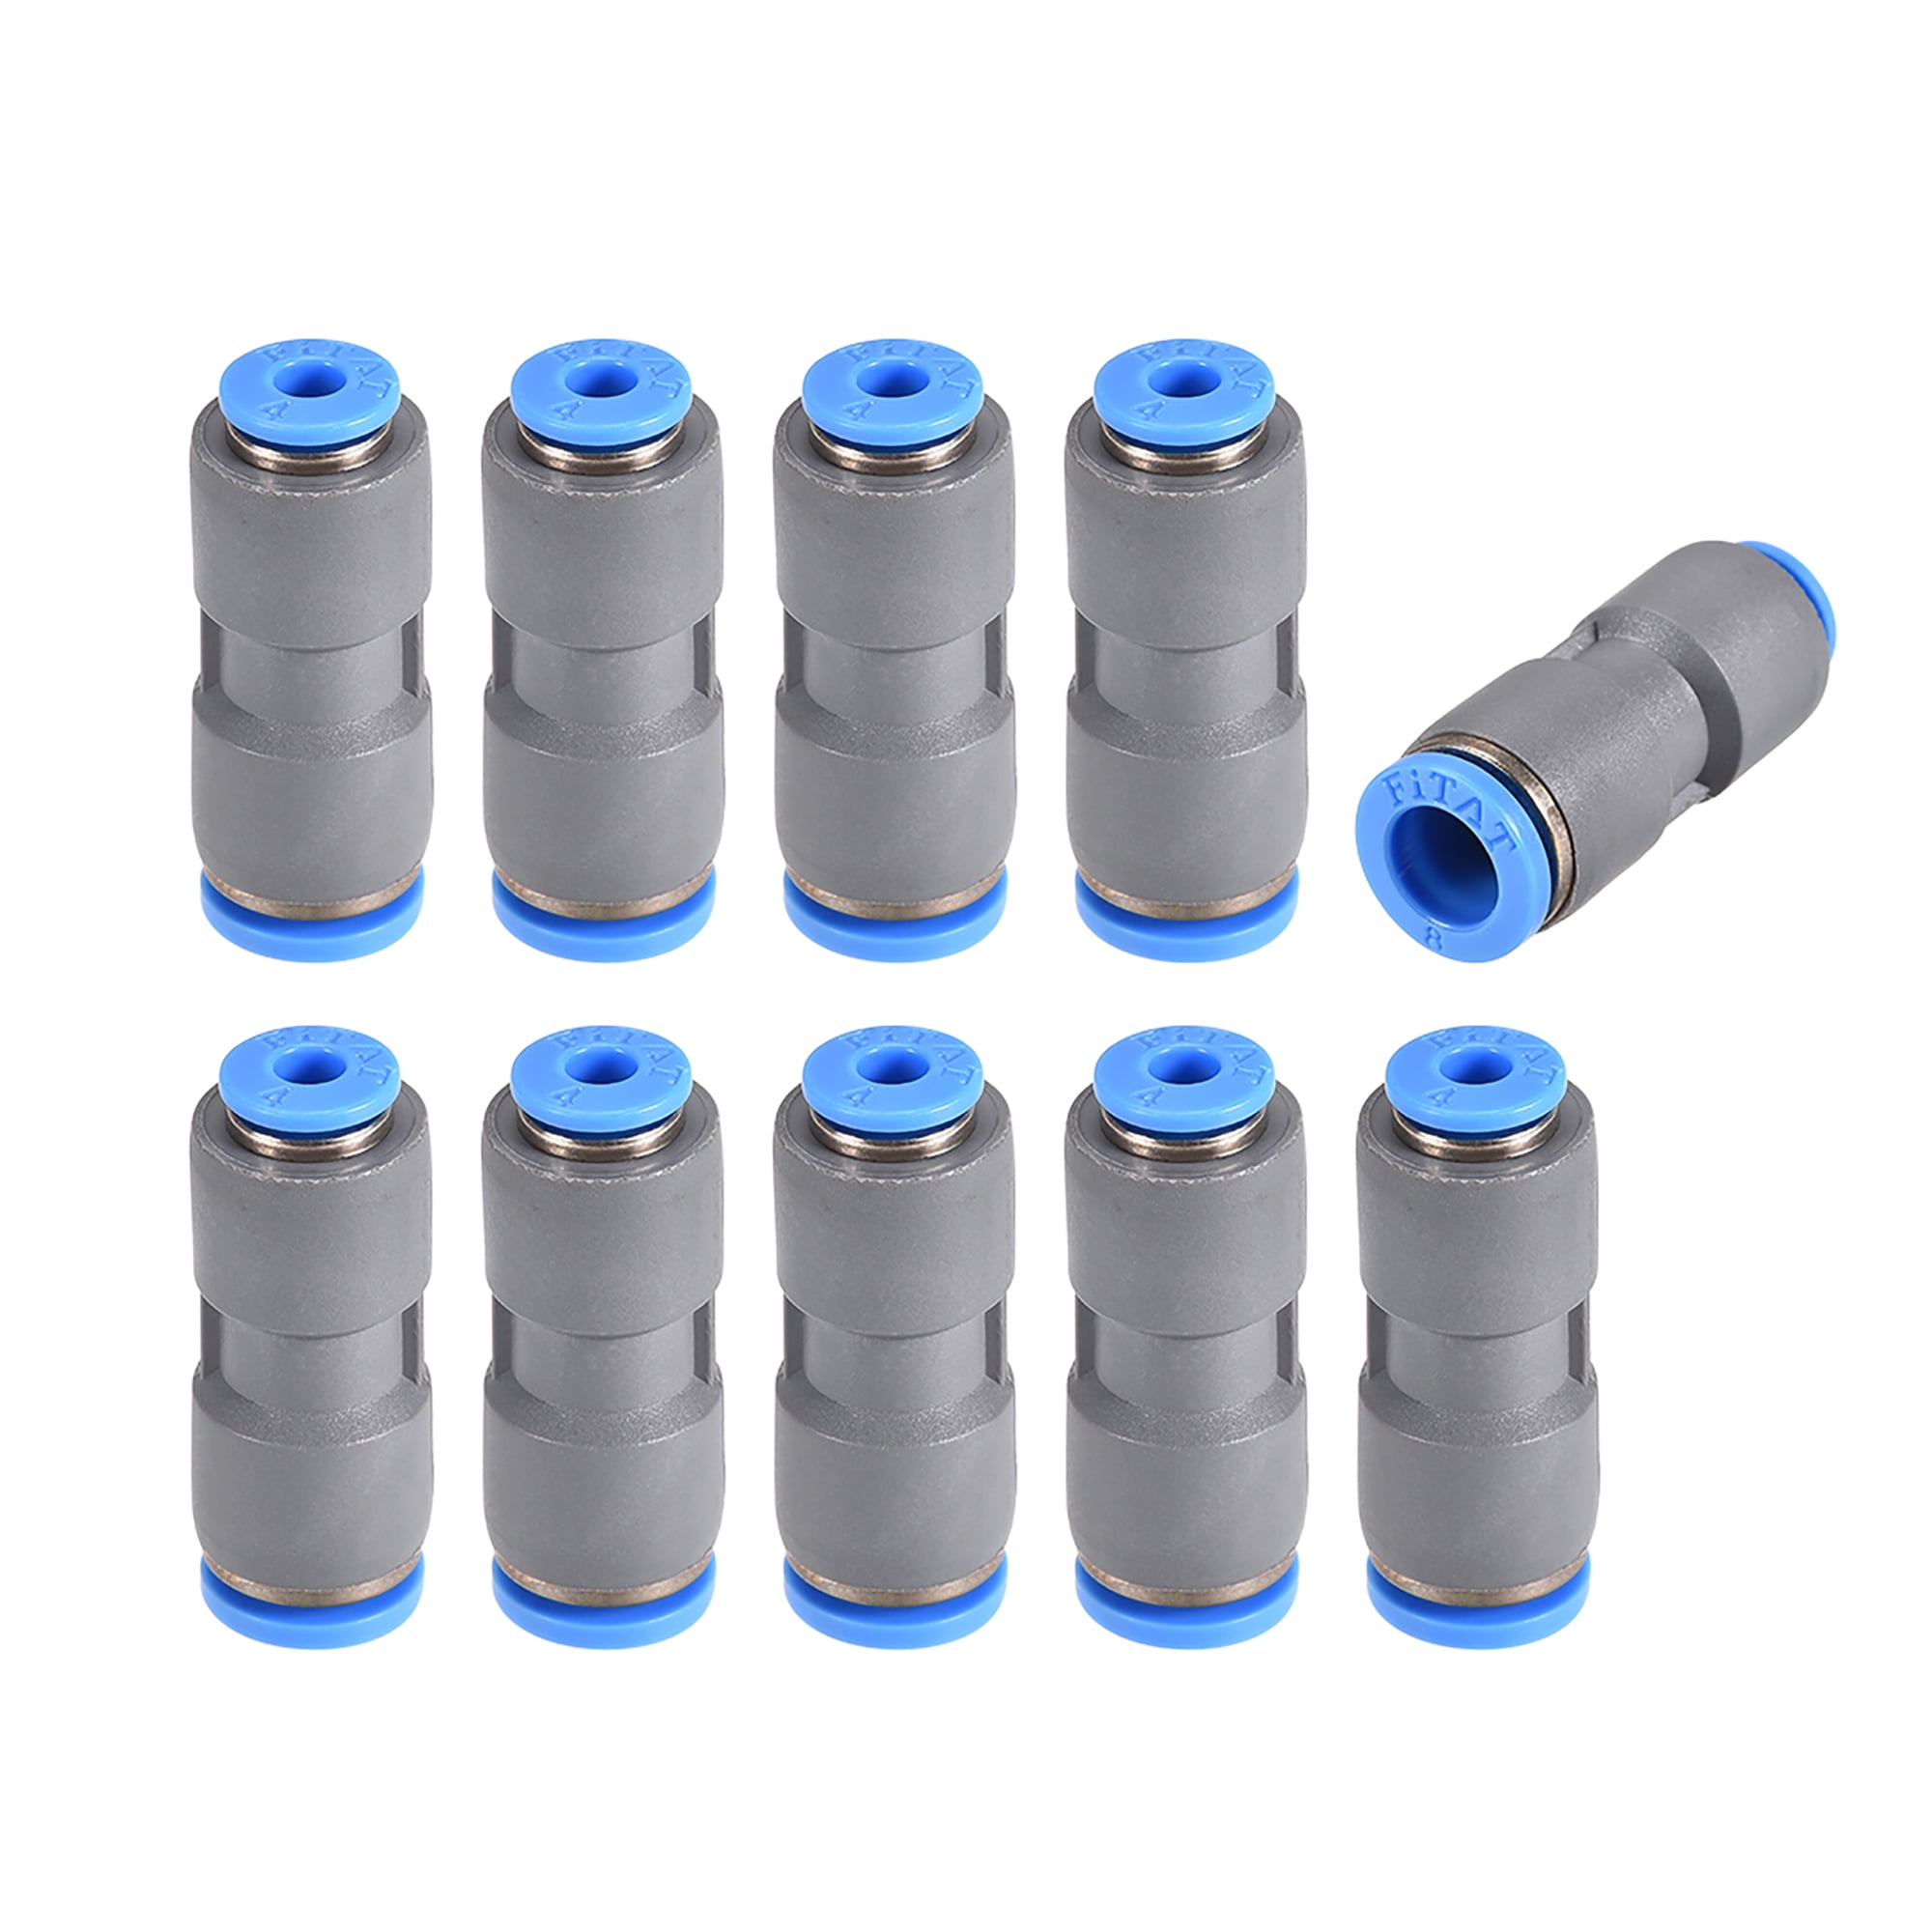 10pcs Tube OD 8mm 5/16 Tee Union Pneumatic Push Connector Air Line Quick Fittings Joint Adapter Couplings Durable 